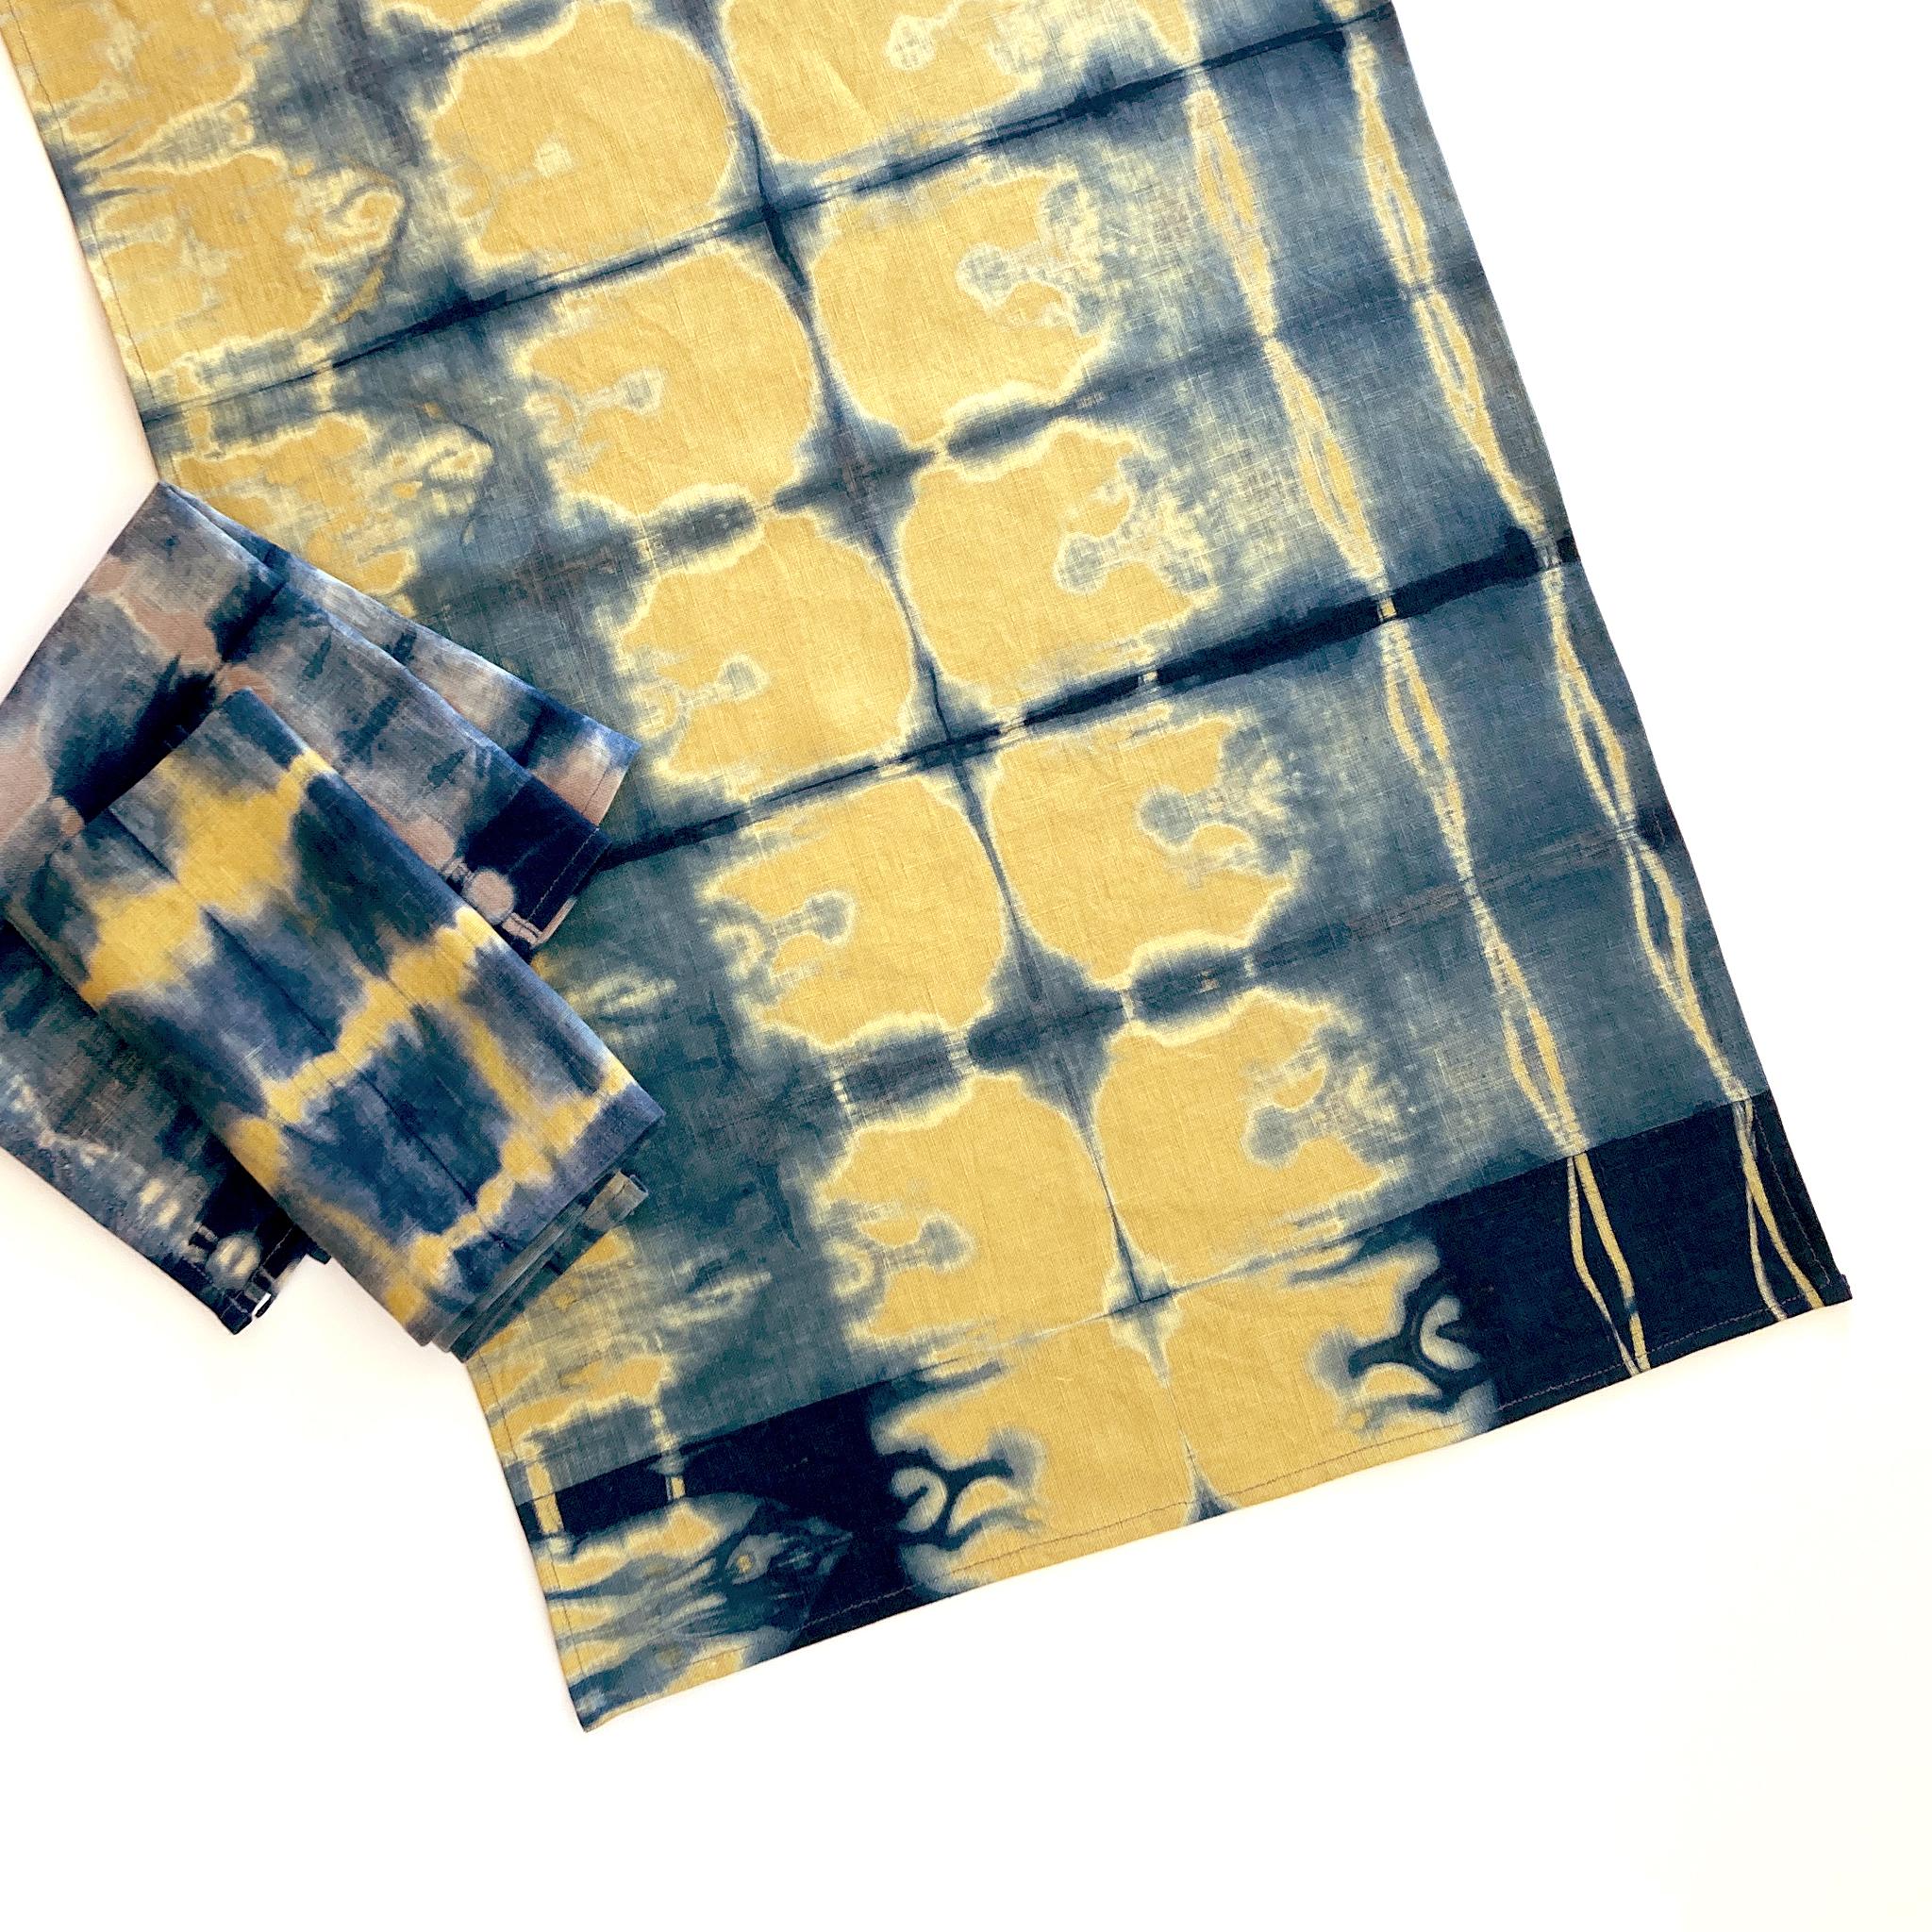 Mustard gold linen table runner dyed with indigo in Pleat pattern. Hand-dyed and sewn in New York City. Runner measures approximately 18 x 72 inches. Each linen runner is hand dyed and one of a kind. 

Each linen panel is cut and folded by hand, in